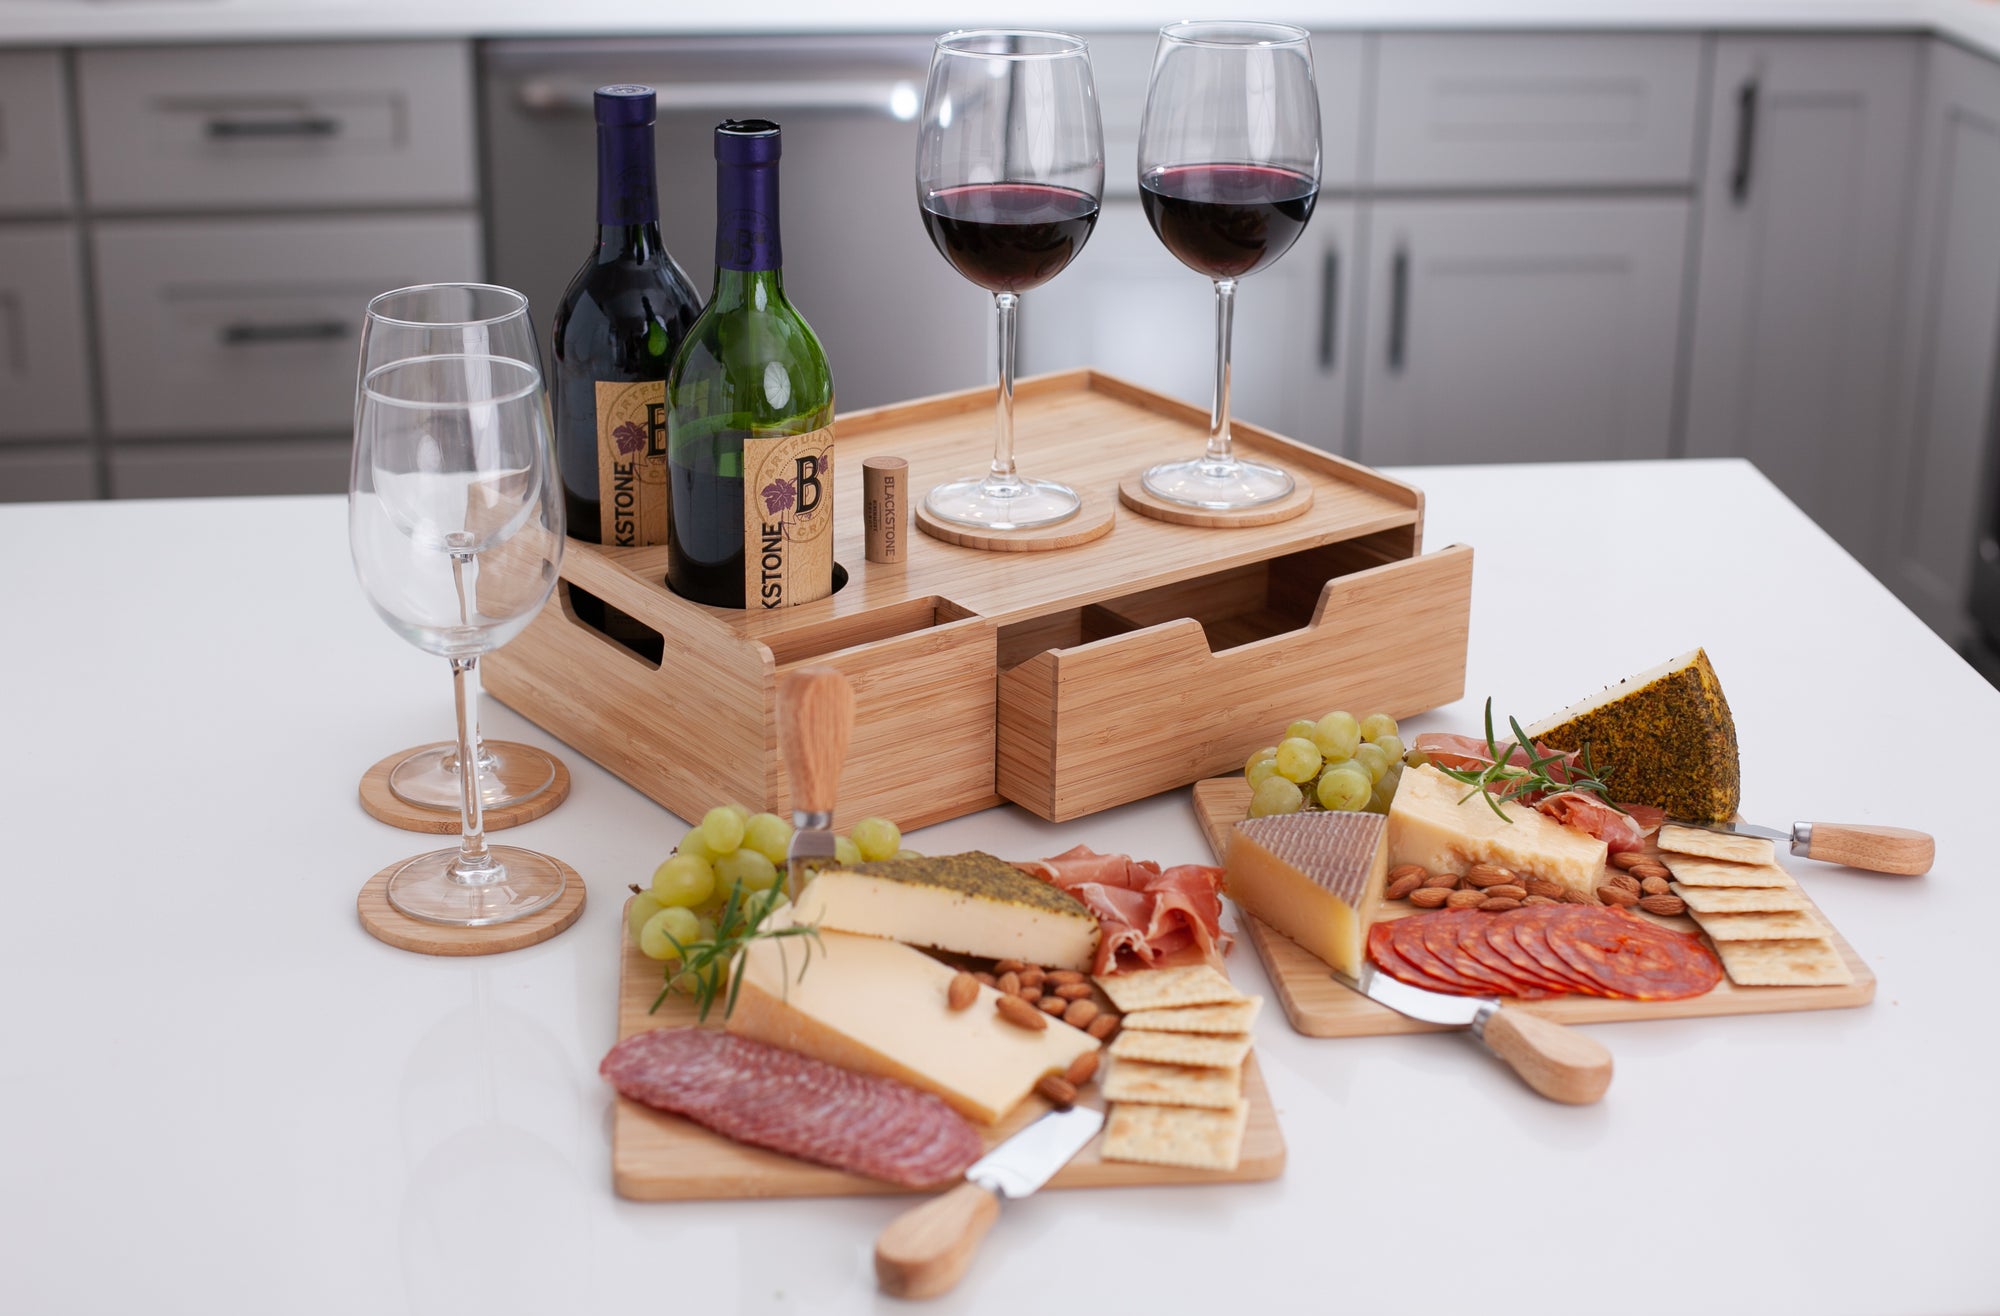 Bamboo Wine & Cheese Serving Tray with Drawer